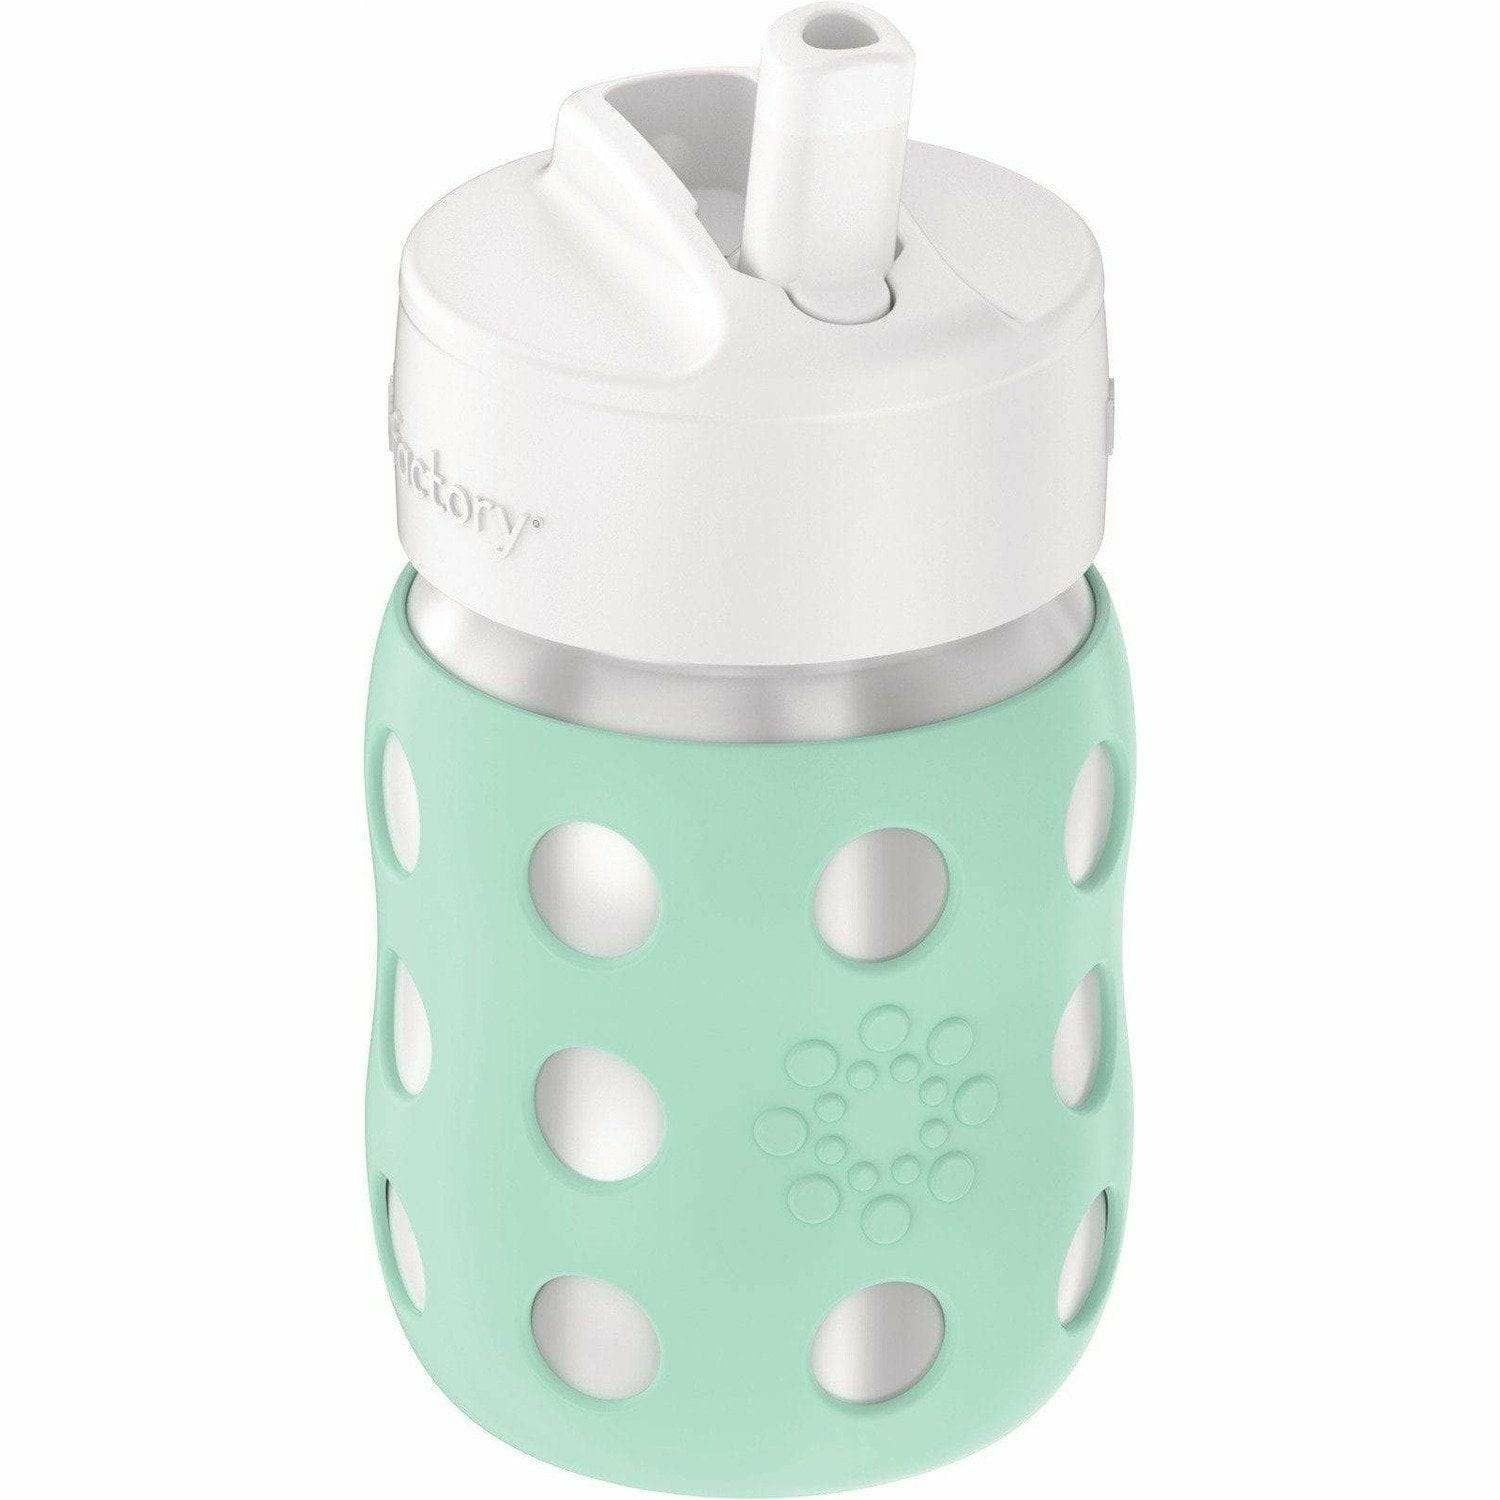 8oz Glass Baby Bottle with Silicone Sleeve | Lifefactory Stone Gray